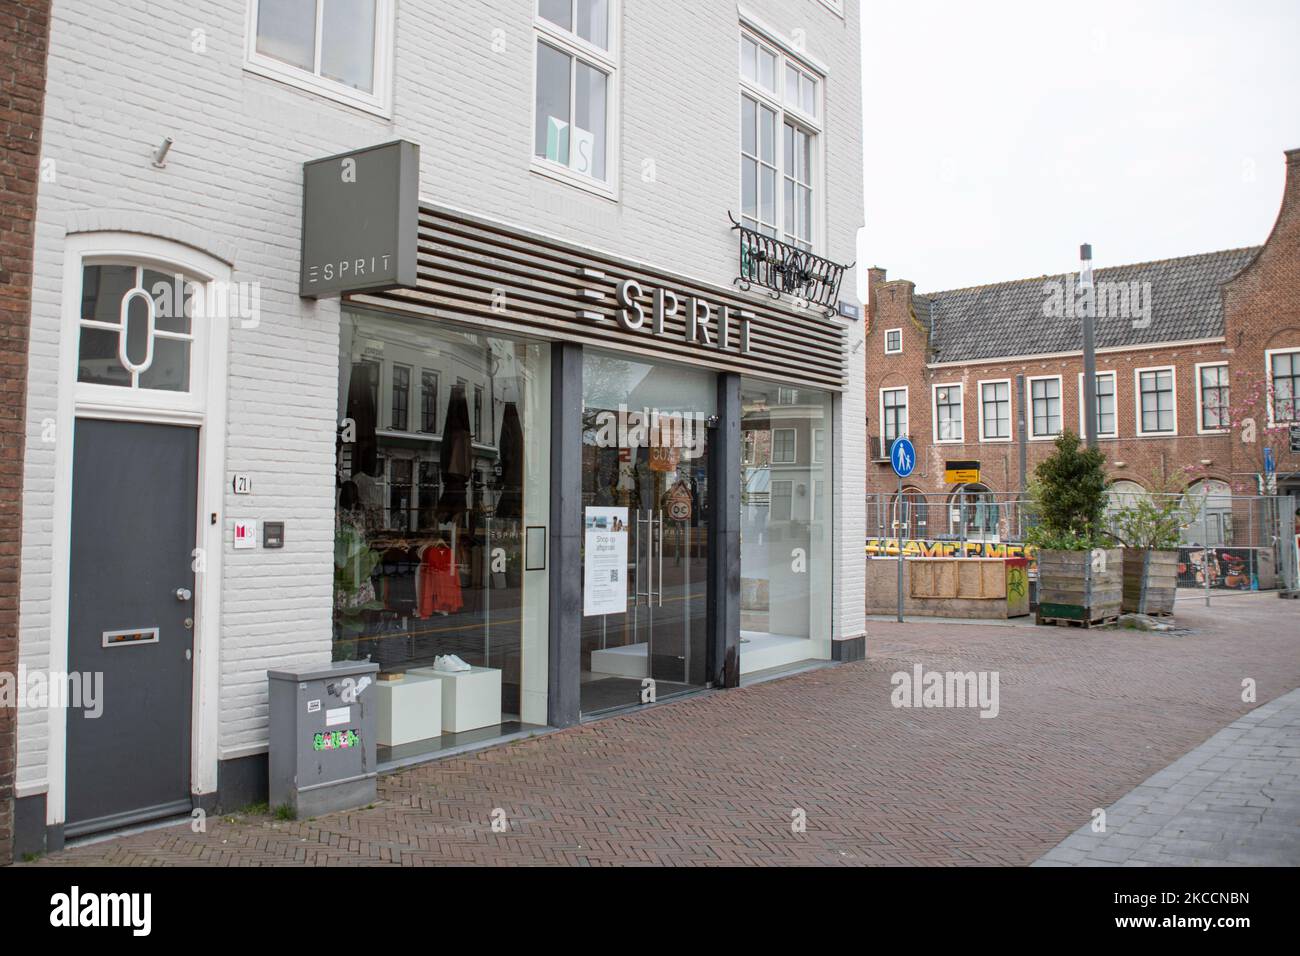 Esprit shop with the logo sign on the facade of the building and a billboard as seen closed in the Dutch city Middelburg. Esprit Holdings Limited is a publicly owned manufacturer of clothing, footwear accessories, jewelry and housewares under the Esprit label with 429 retail stores worldwide. Due to the Covid-19 Coronavirus pandemic and the lockdown measures applied, shopping to non-essential shops is allowed only with an appointment. Middelburg, Netherlands on Apri 11, 2021 (Photo by Nicolas Economou/NurPhoto) Stock Photo